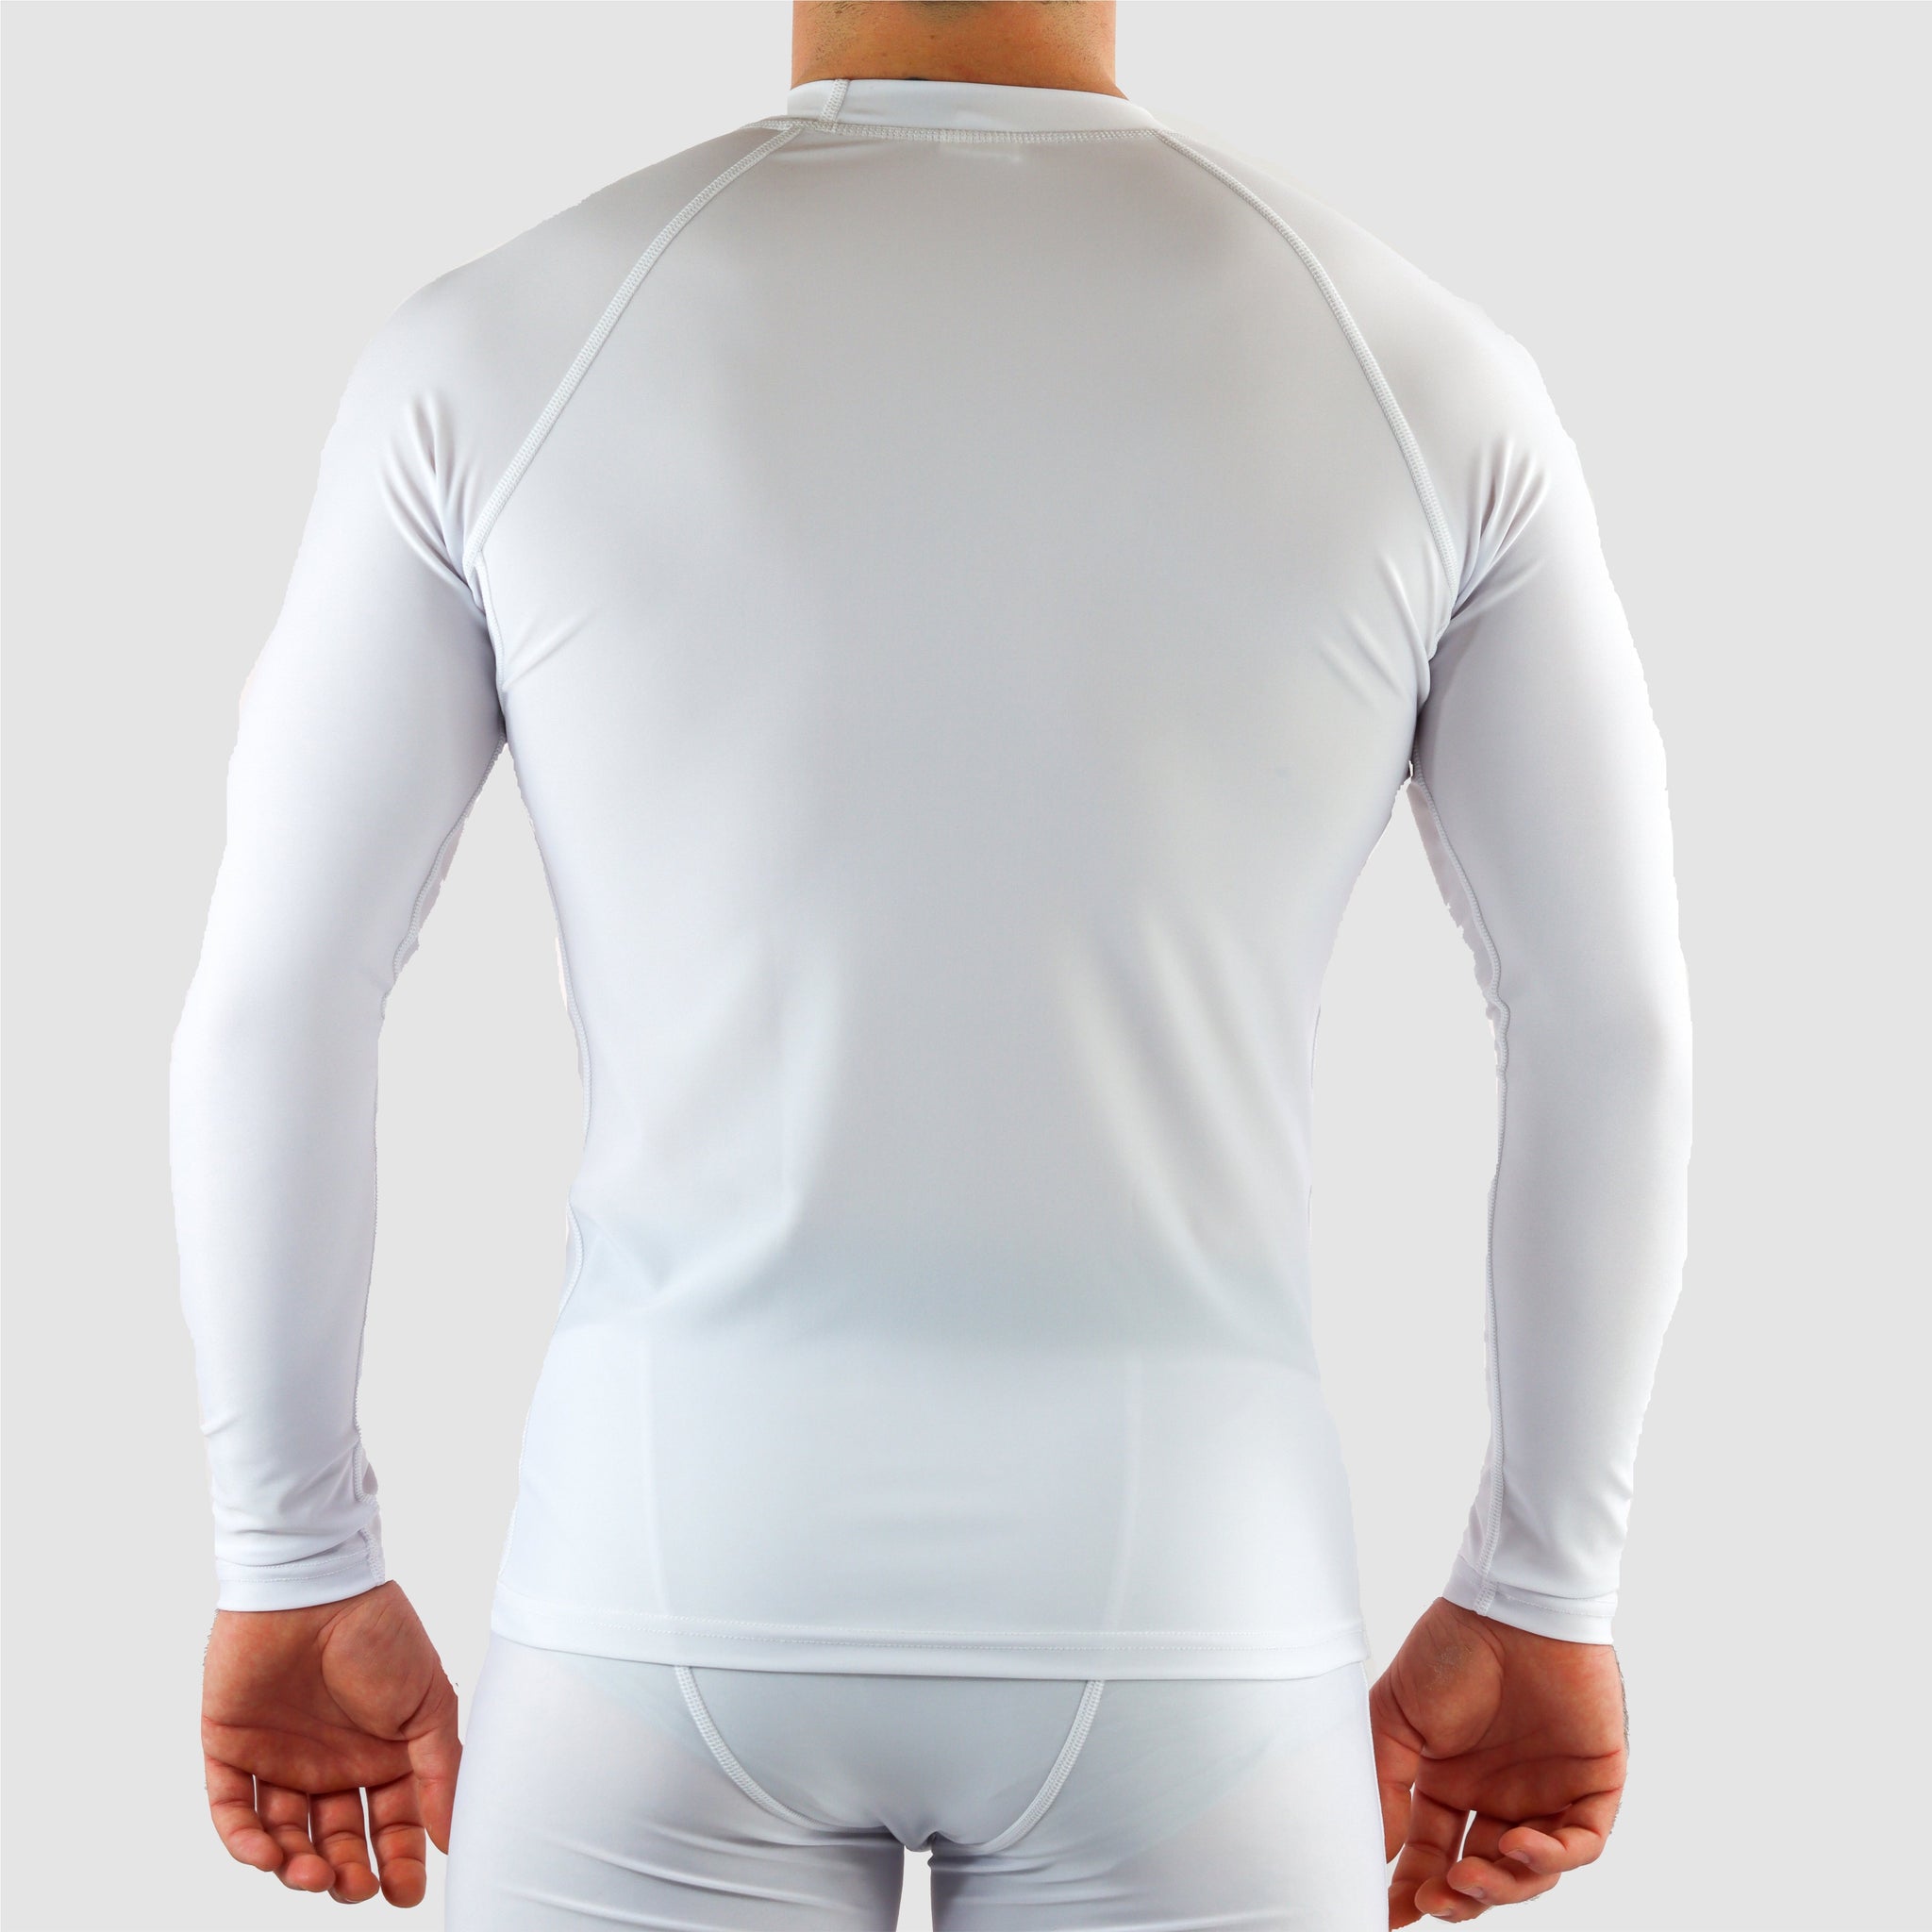 DiDOO Men's Compression Baselayer Top Long Sleeve